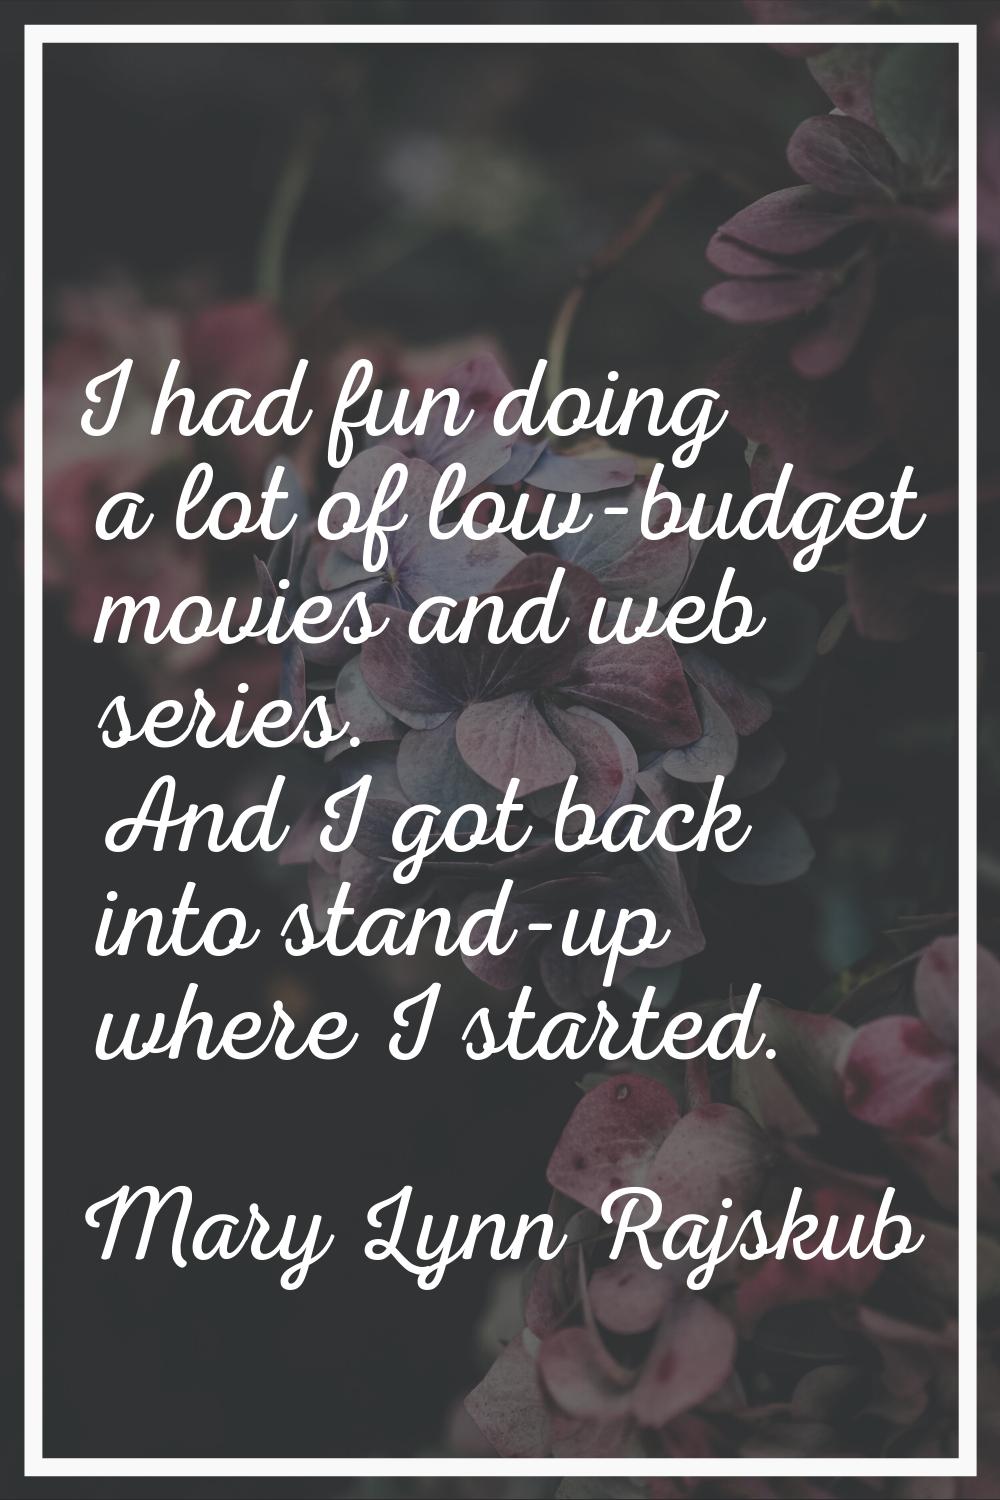 I had fun doing a lot of low-budget movies and web series. And I got back into stand-up where I sta